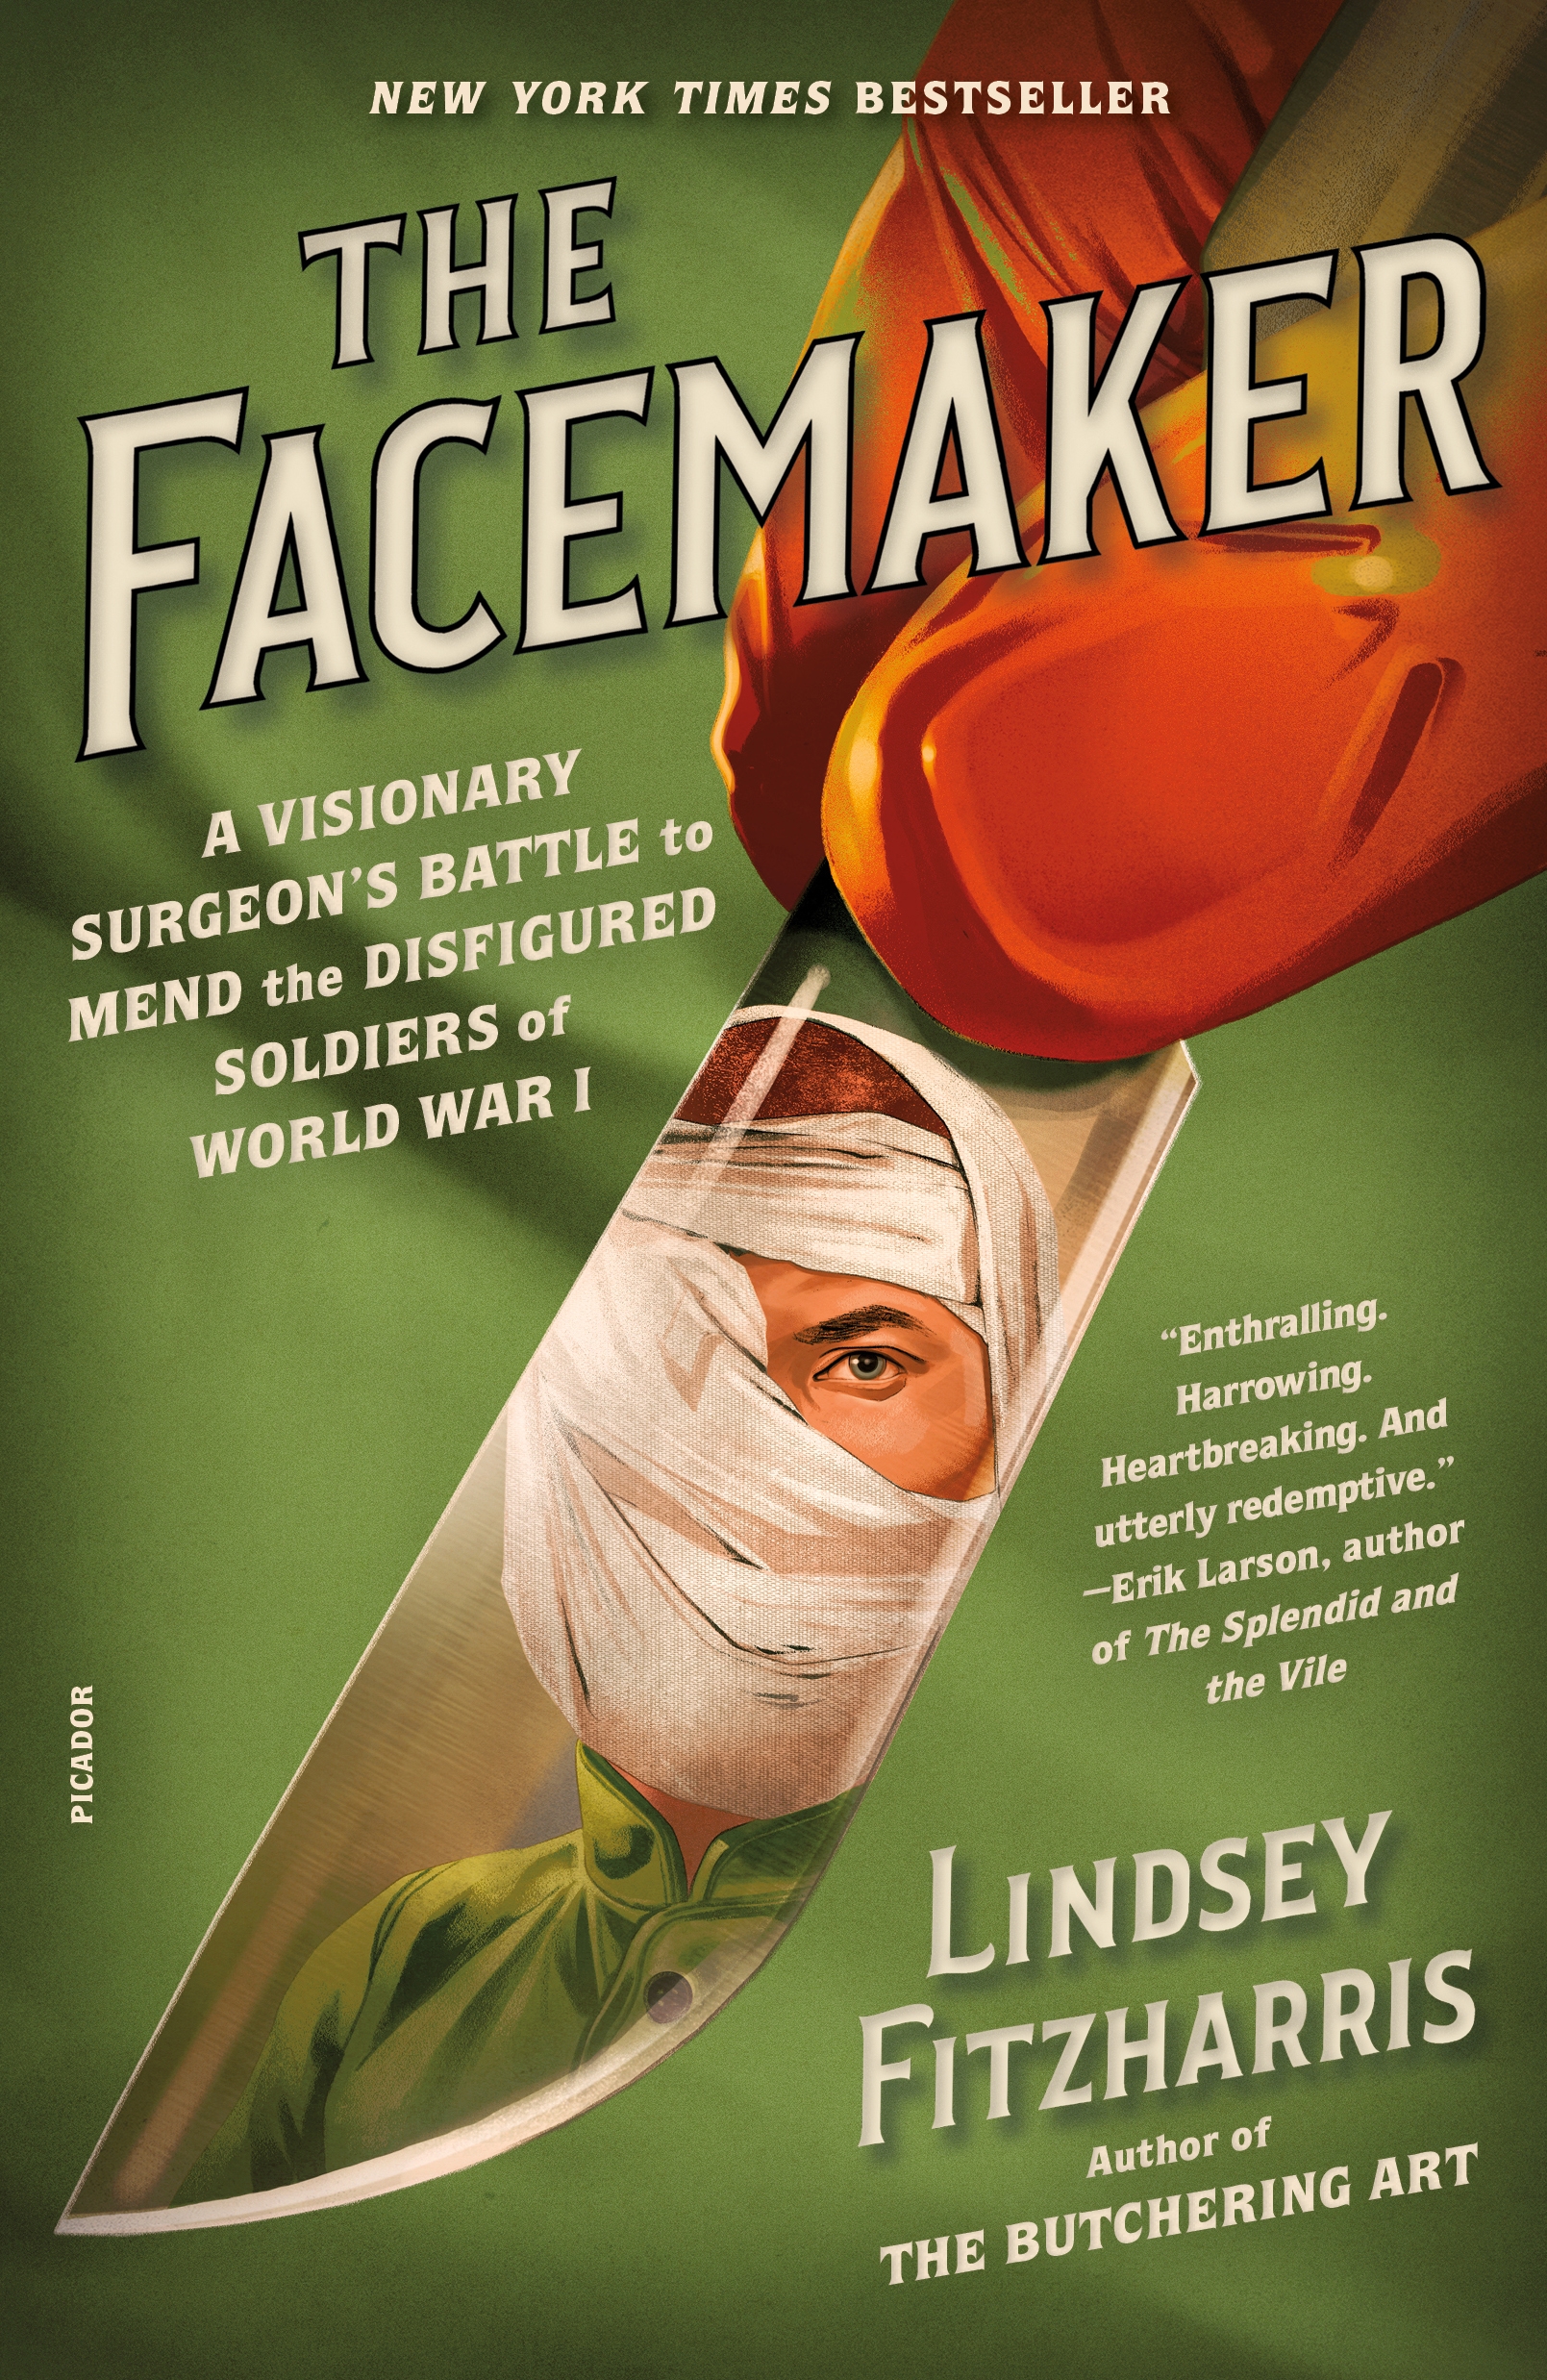 The Facemaker A Visionary Surgeon's Battle to Mend the Disfigured Soldiers of World War I cover image